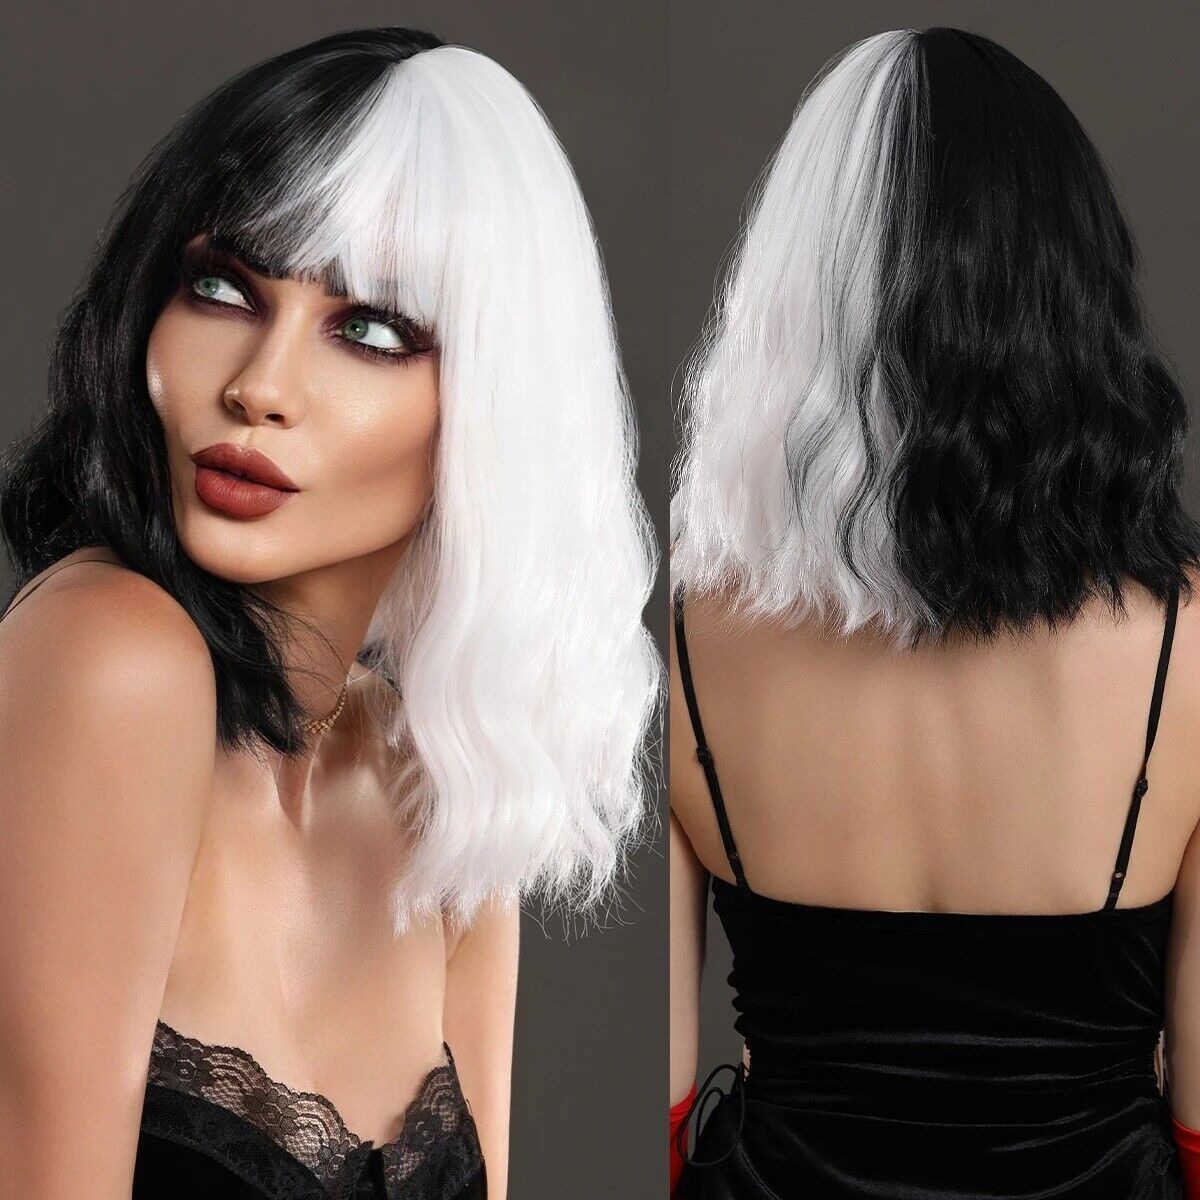 

Hair Lace Wigs Black and White Double Color Chemical Fiber Women's Short Curly Hair with Bangs Mechanism Head Cover Cos Wig